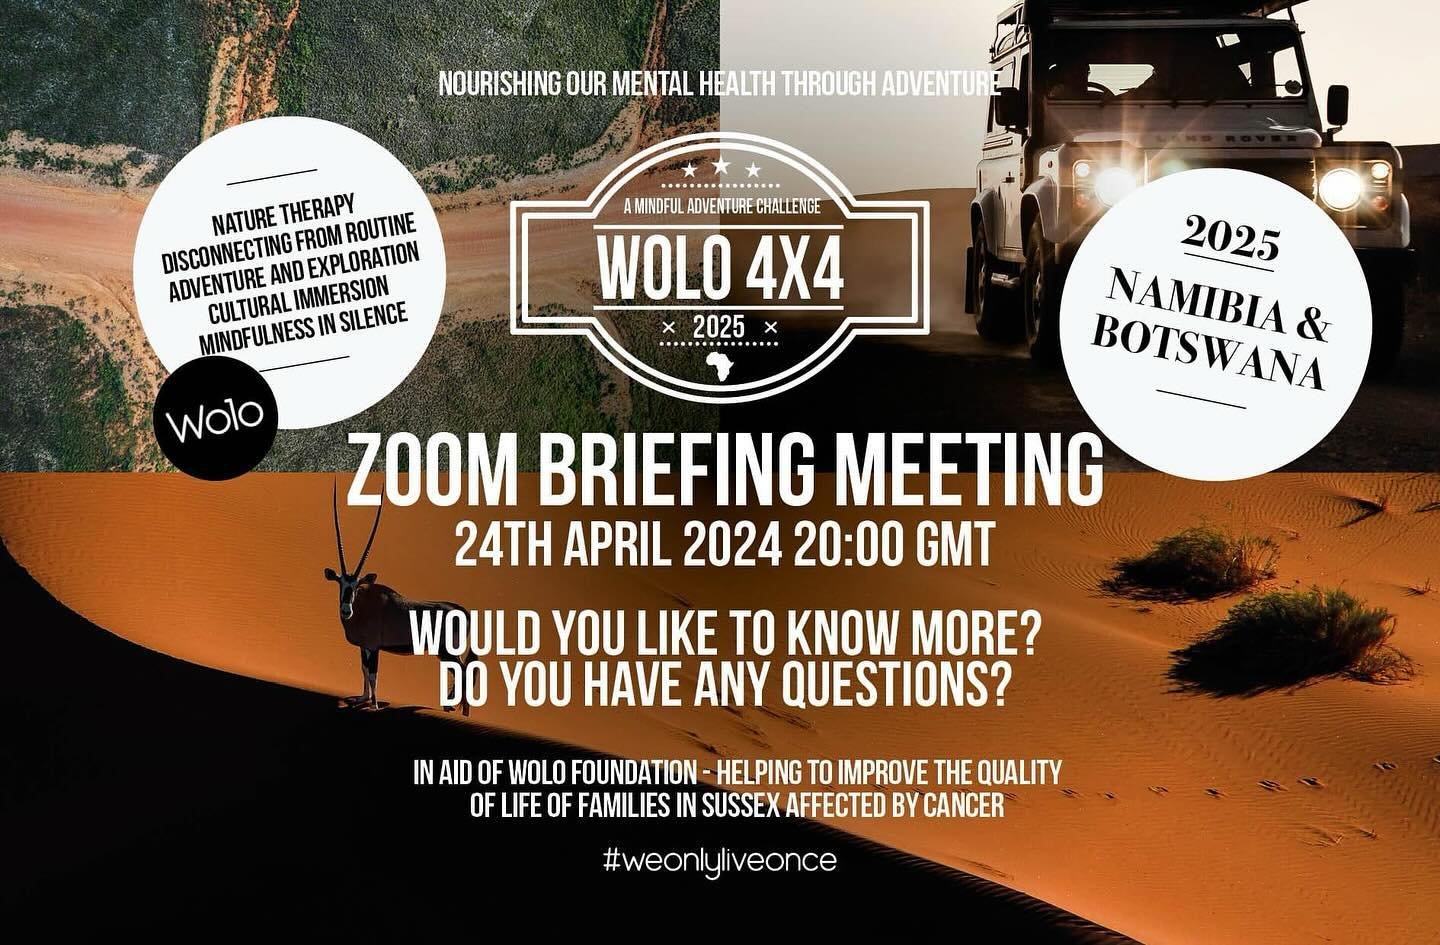 🐘🦒🚙Wolo Africa 4x4 2025 Adventure Challenge Zoom Briefing 🚗🦏🐊

Would you like to know more?  Do you have questions?

We have a Zoom Briefing for the Wolo Africa 4x4 2025 event 24th April at 8pm (GMT). 

Please come along and share with friends,